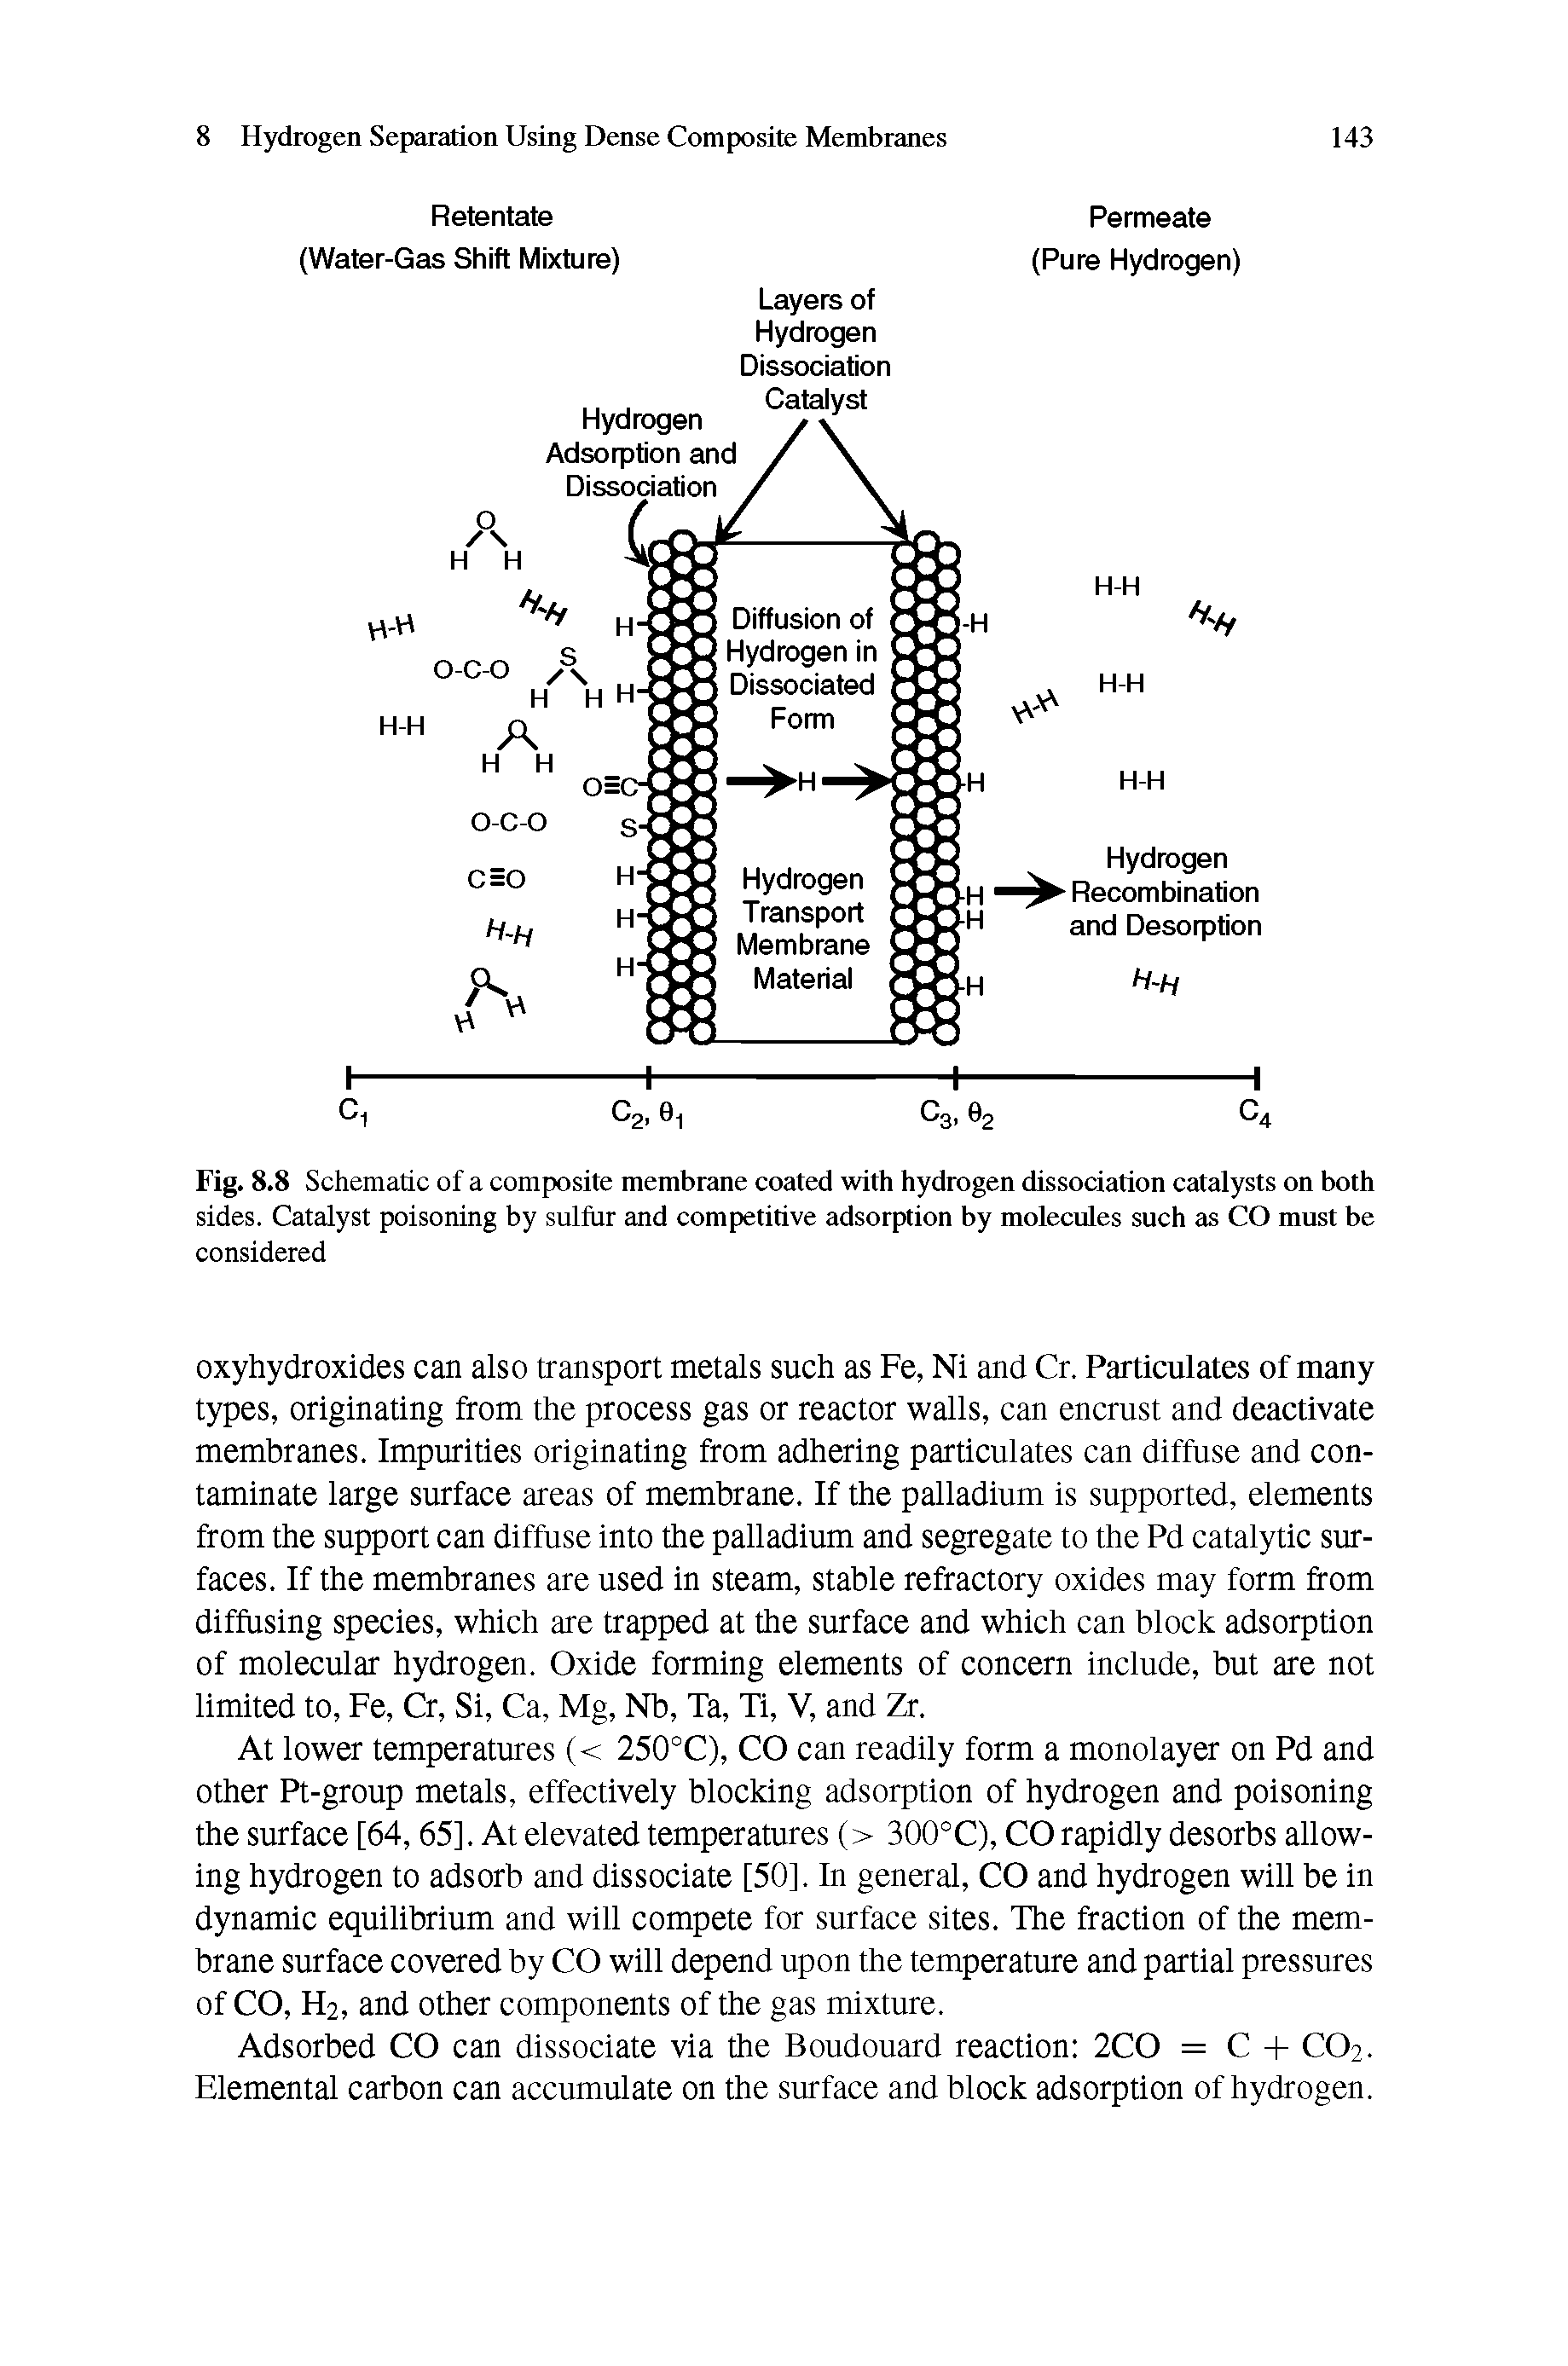 Fig. 8.8 Schematic of a composite membrane coated with hydrogen dissociation catalysts on both sides. Catalyst poisoning by sulfur and competitive adsorption by molecules such as CO must be considered...